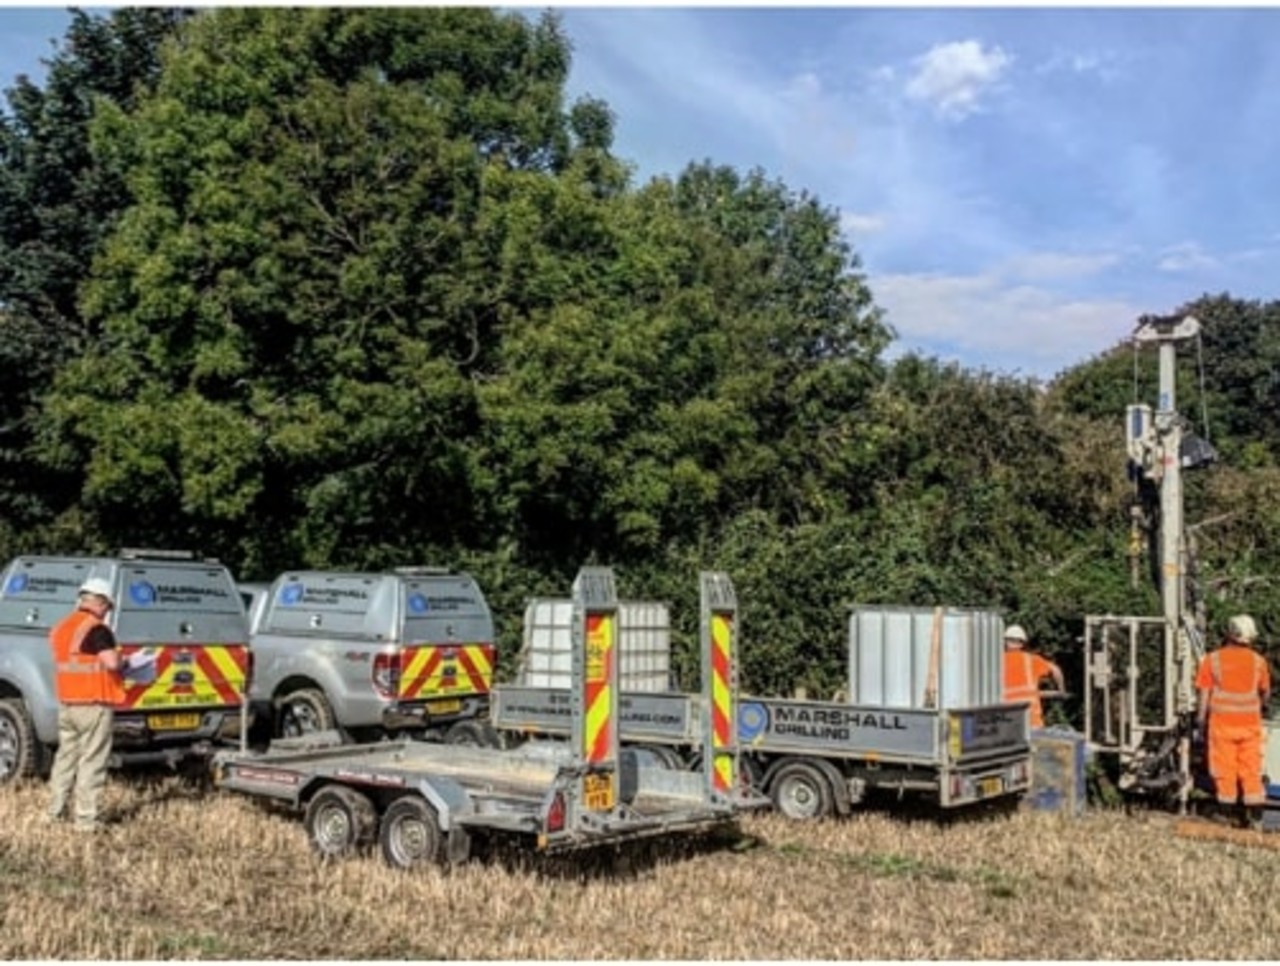 Contractors wearing orange high-vis PPE working in a field next to cars with trailers